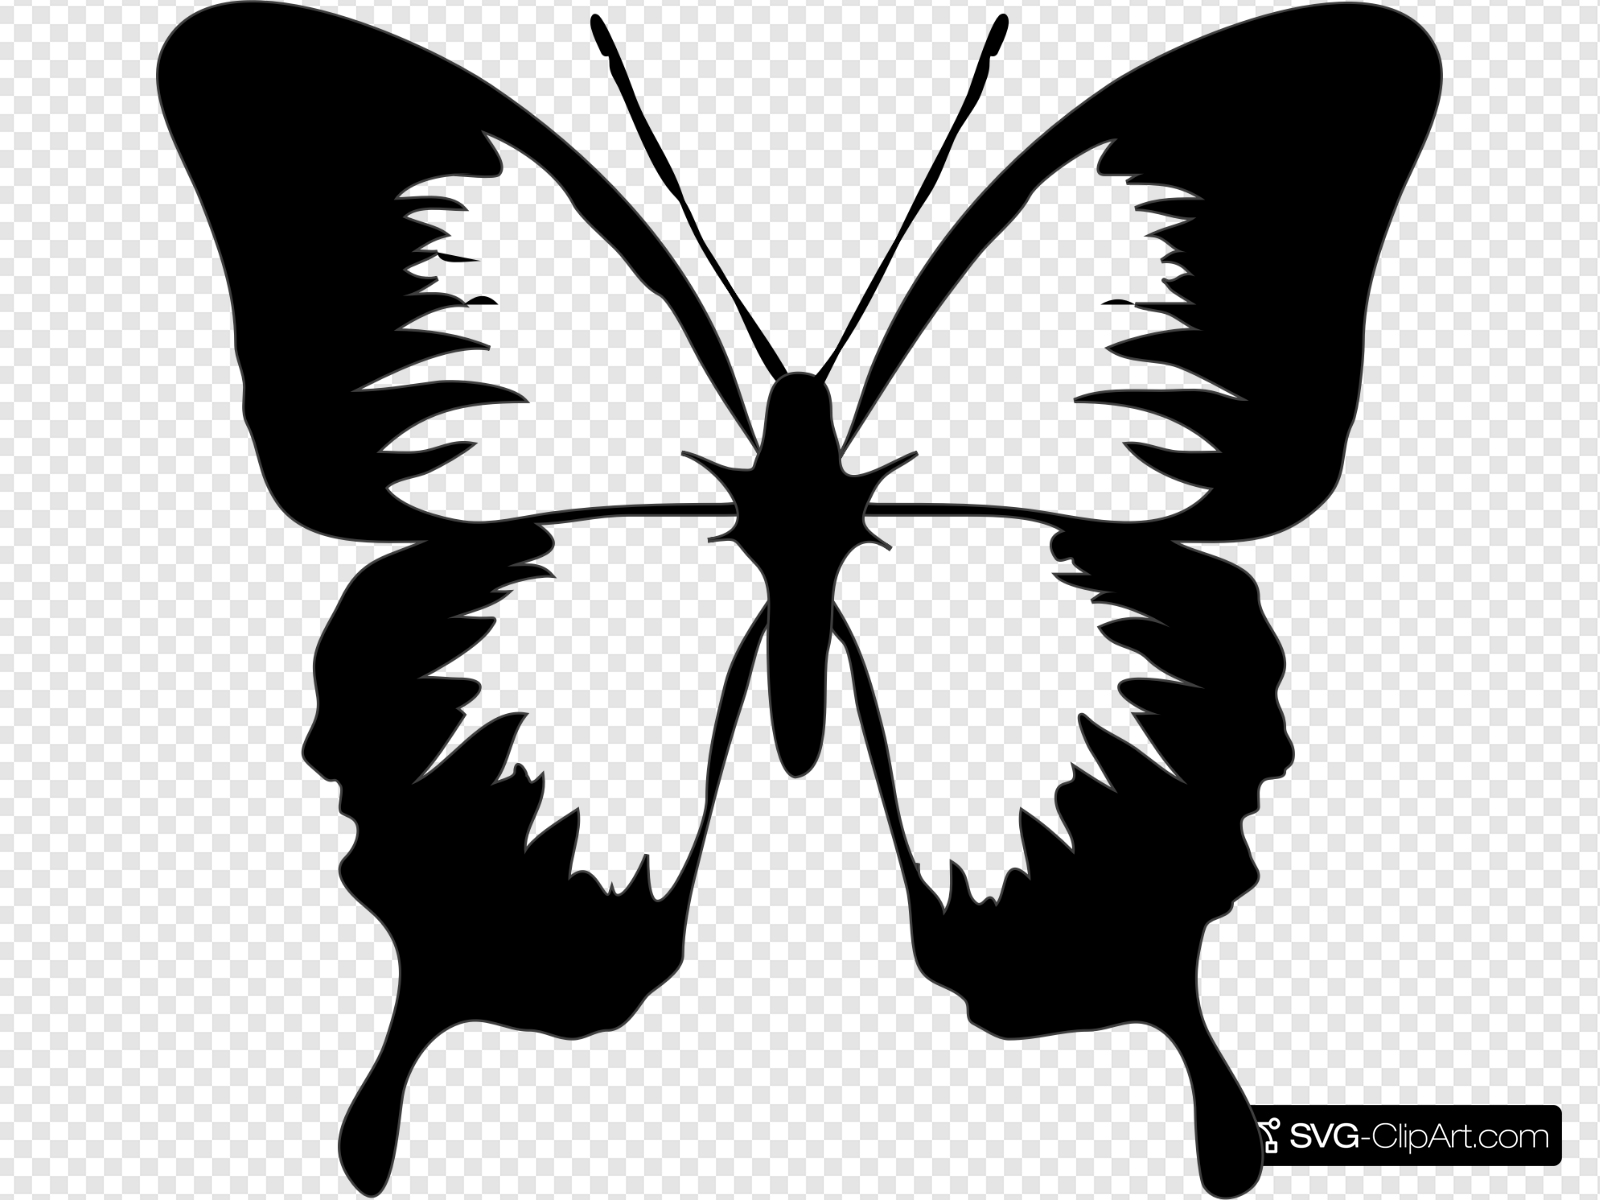 Butterfly Clip art, Icon and SVG.